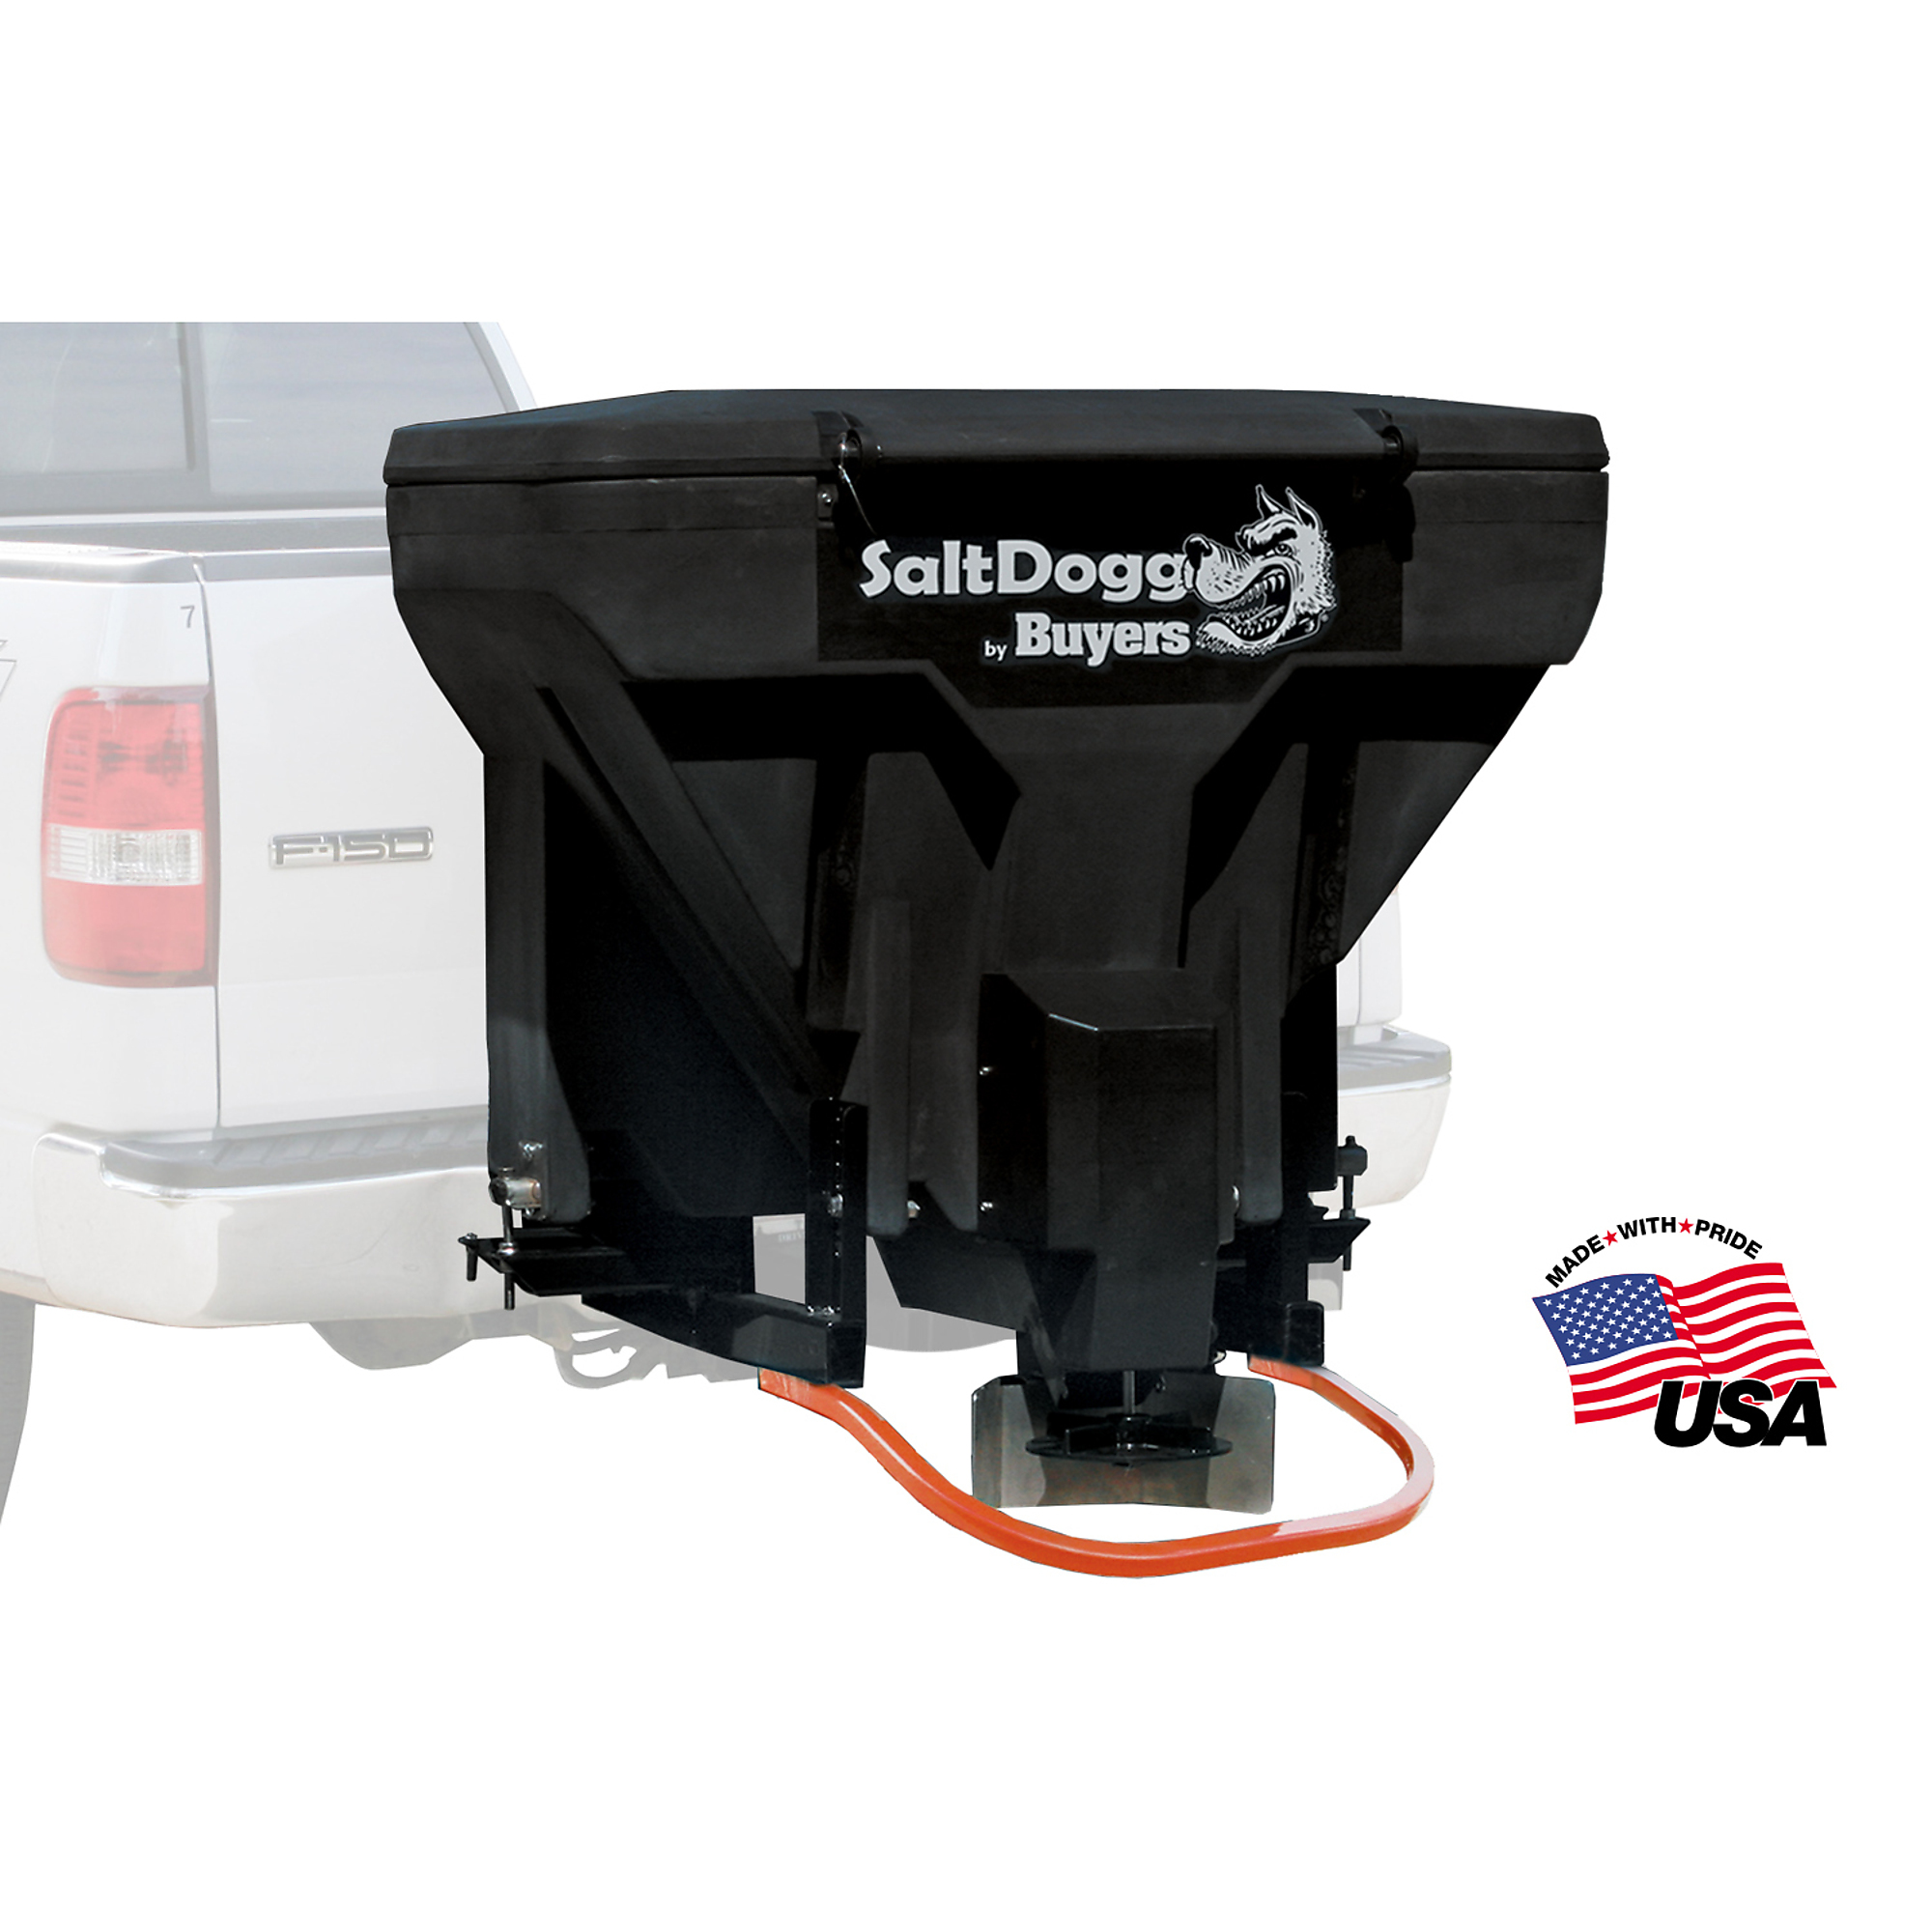 Buyers Products SaltDogg, Truck Tailgate Mounted Rock Salt Ice Melt Spreader w/ Lid, Load Capacity 825 lb, Max. Spread Width 40 ft, Model TGS07